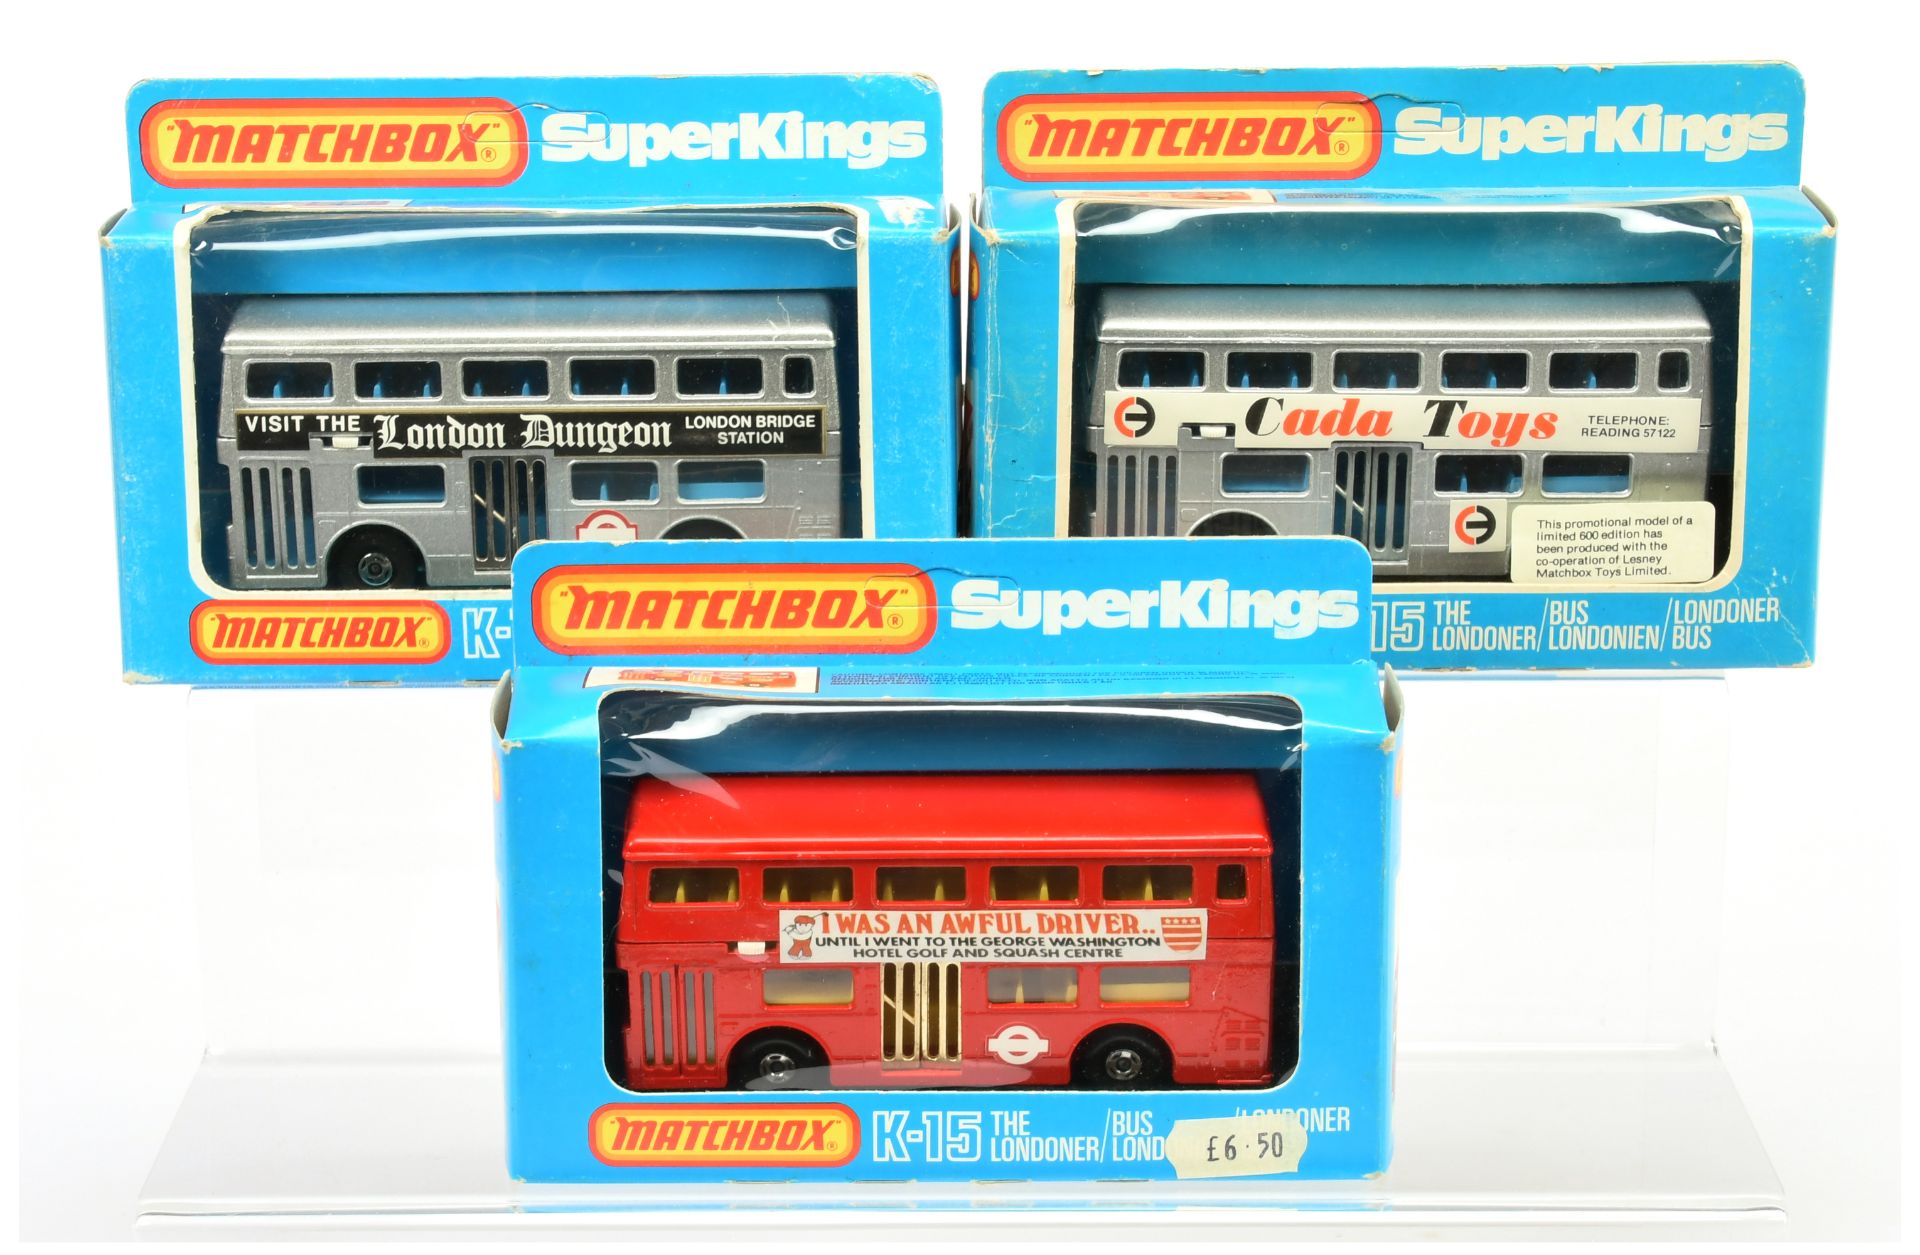 Matchbox Super King group of buses to include K15 Londoner "I was an awful driver"